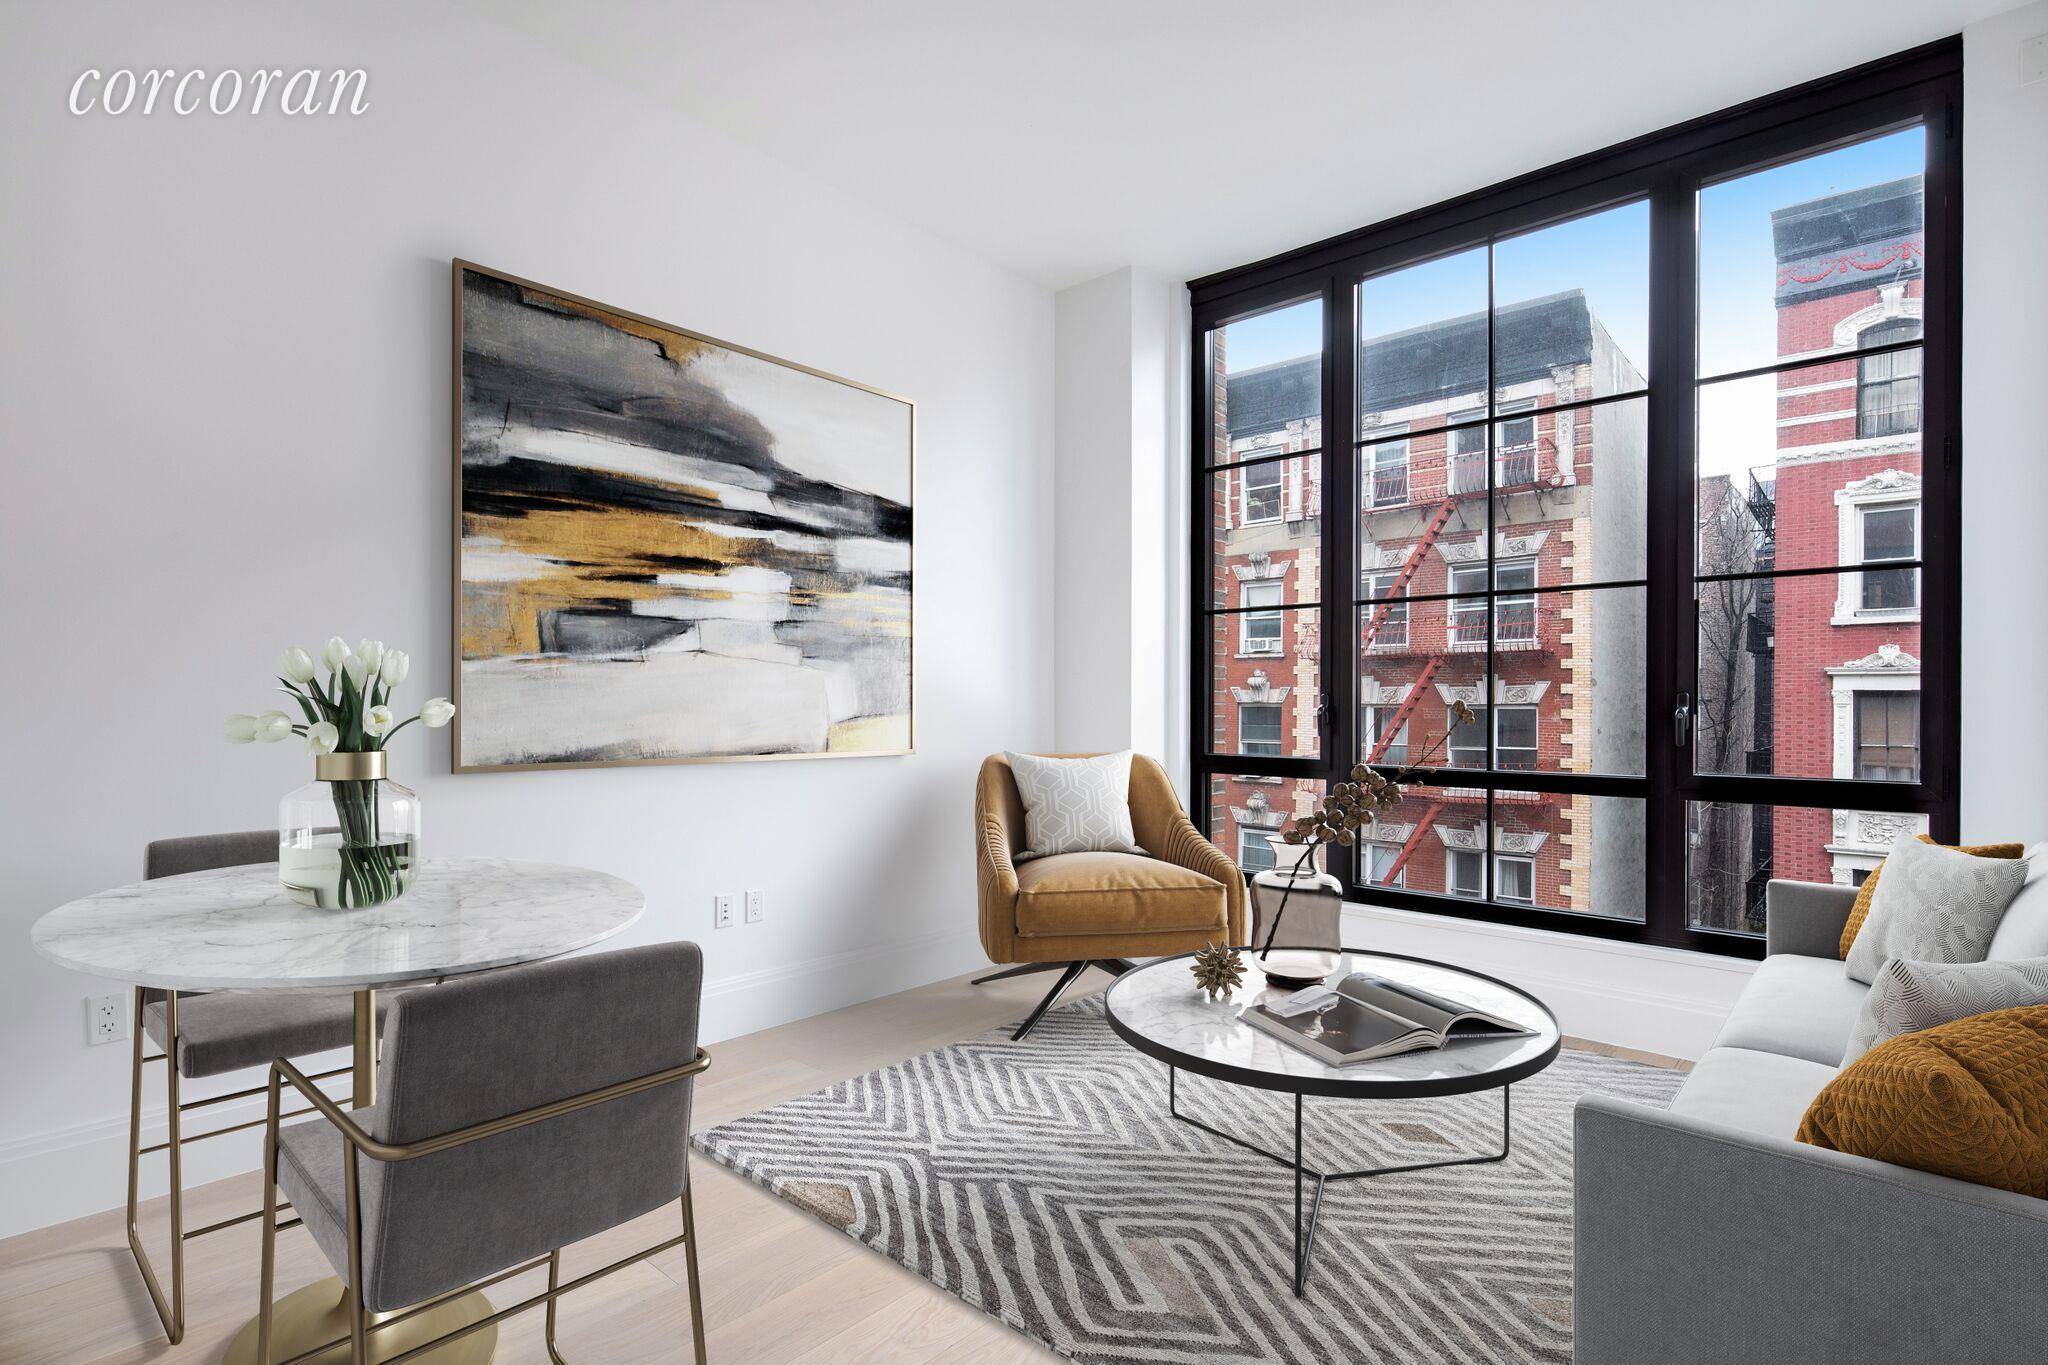 This lux full service condominium in the heart of the East Village offers a rare modern retreat in this historic neighborhood.